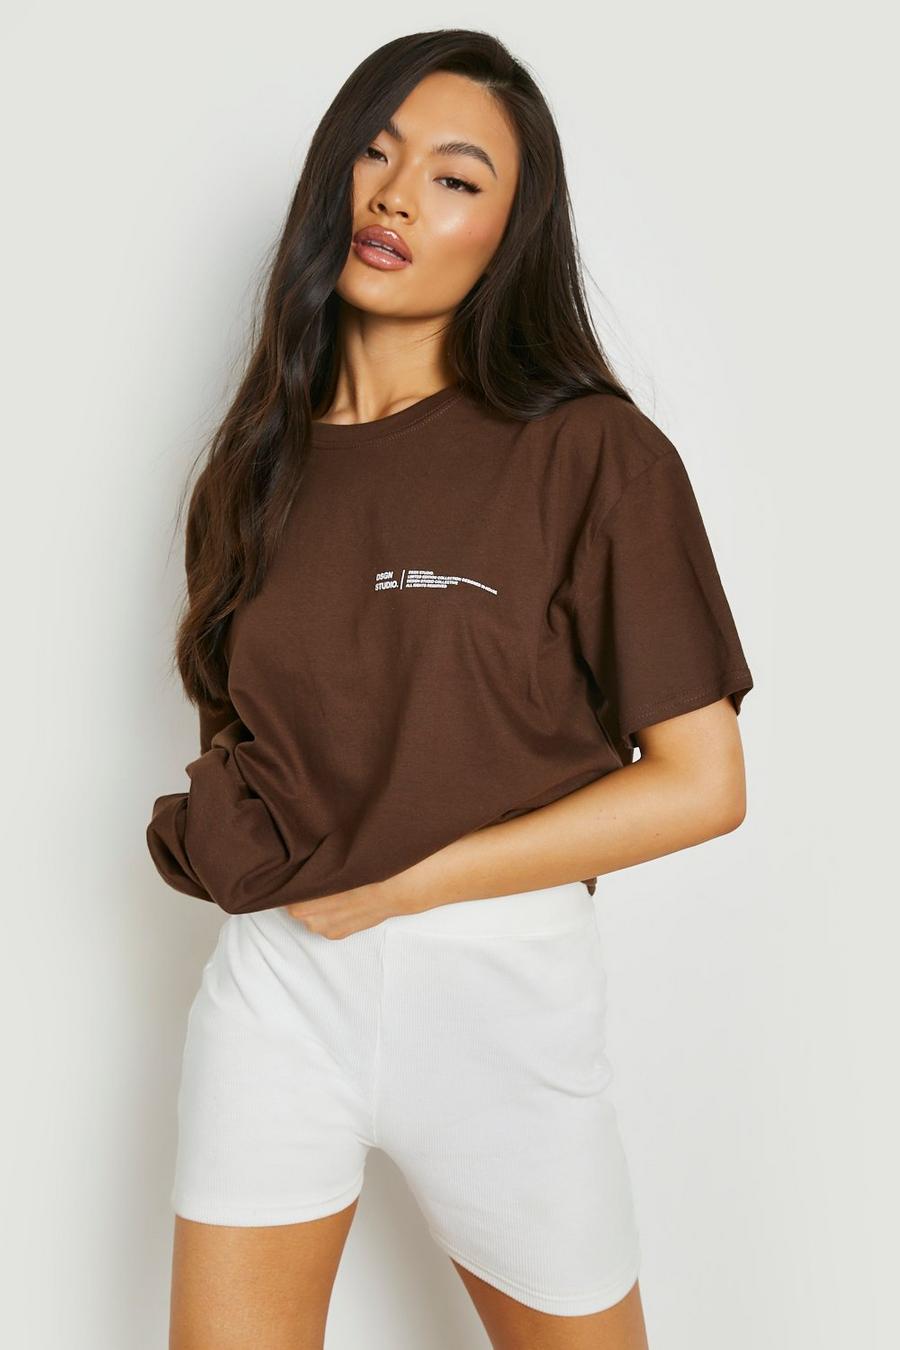 Chocolate brown Oversized Text Graphic T-Shirt